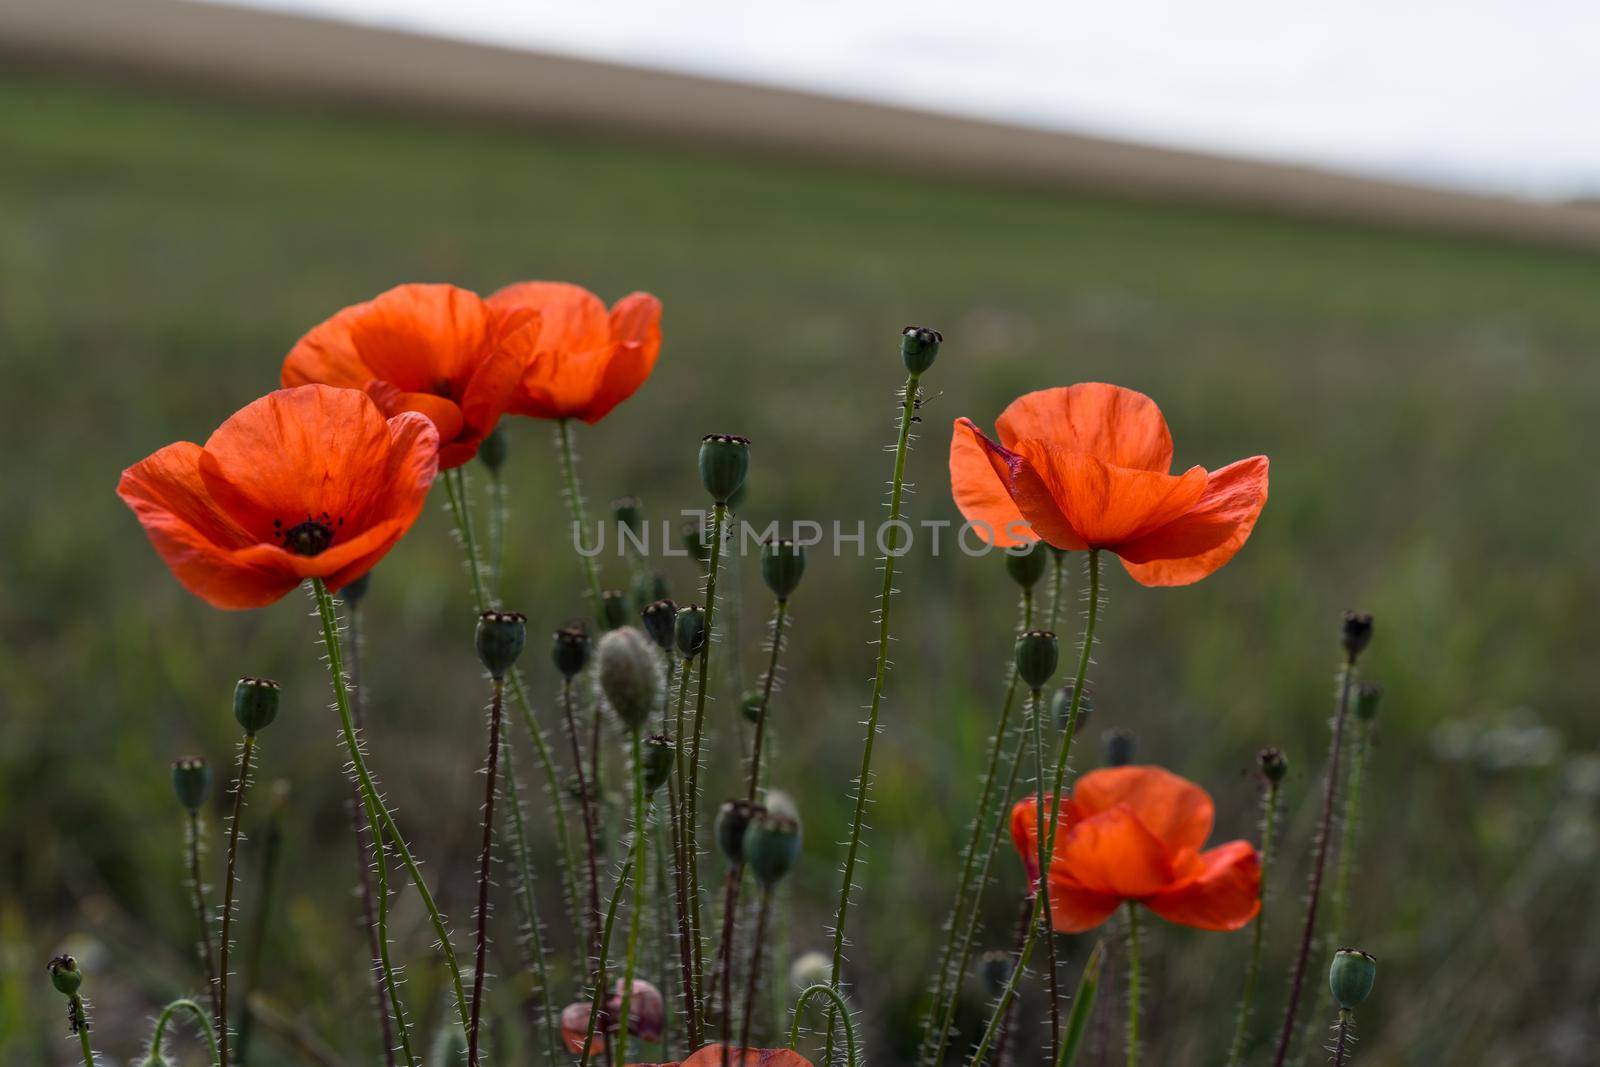 a Poppy flower. A field of poppy flowers blossoming during spring against a landscape with shallow depth of field